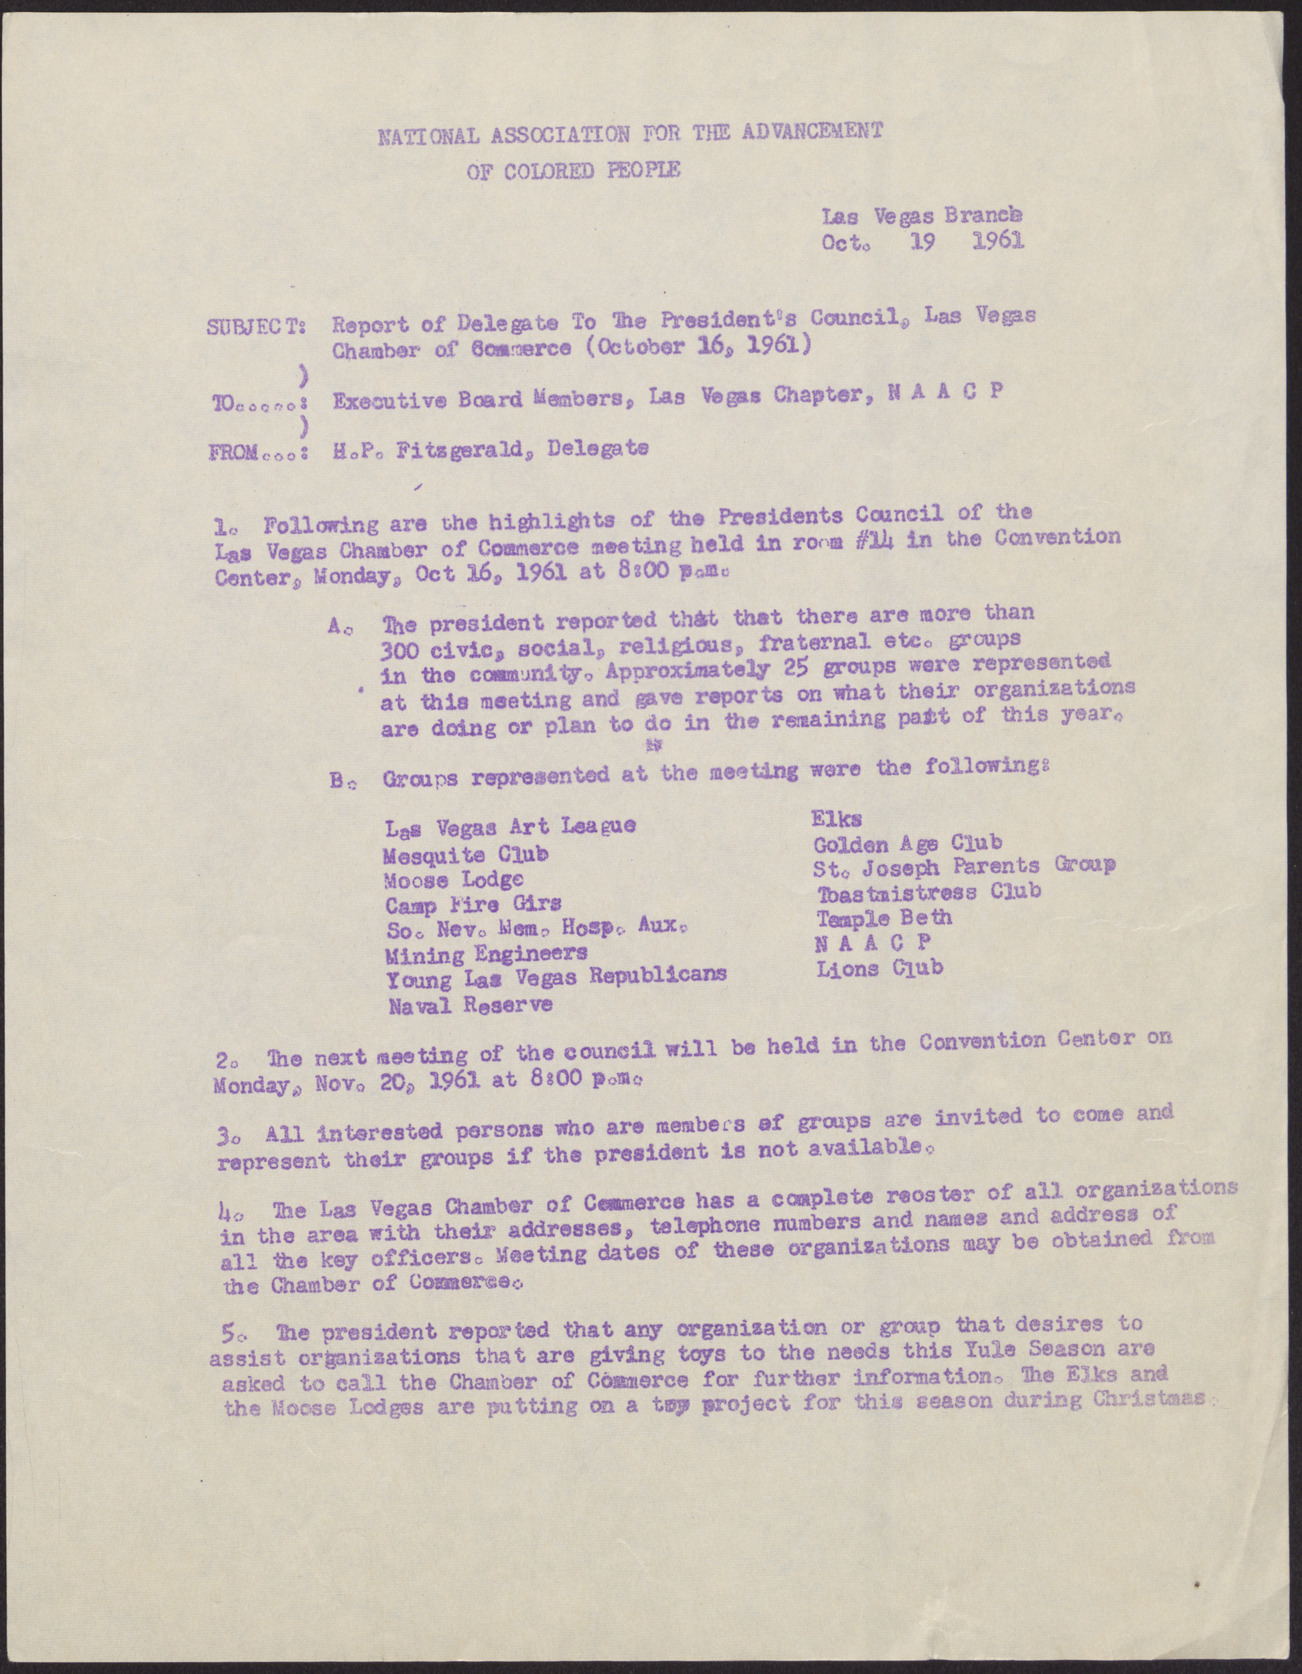 Letter to the Executive Board Members of the Las Vegas NAACP Chapter from H. P. Fitzgerald, October 19, 1961